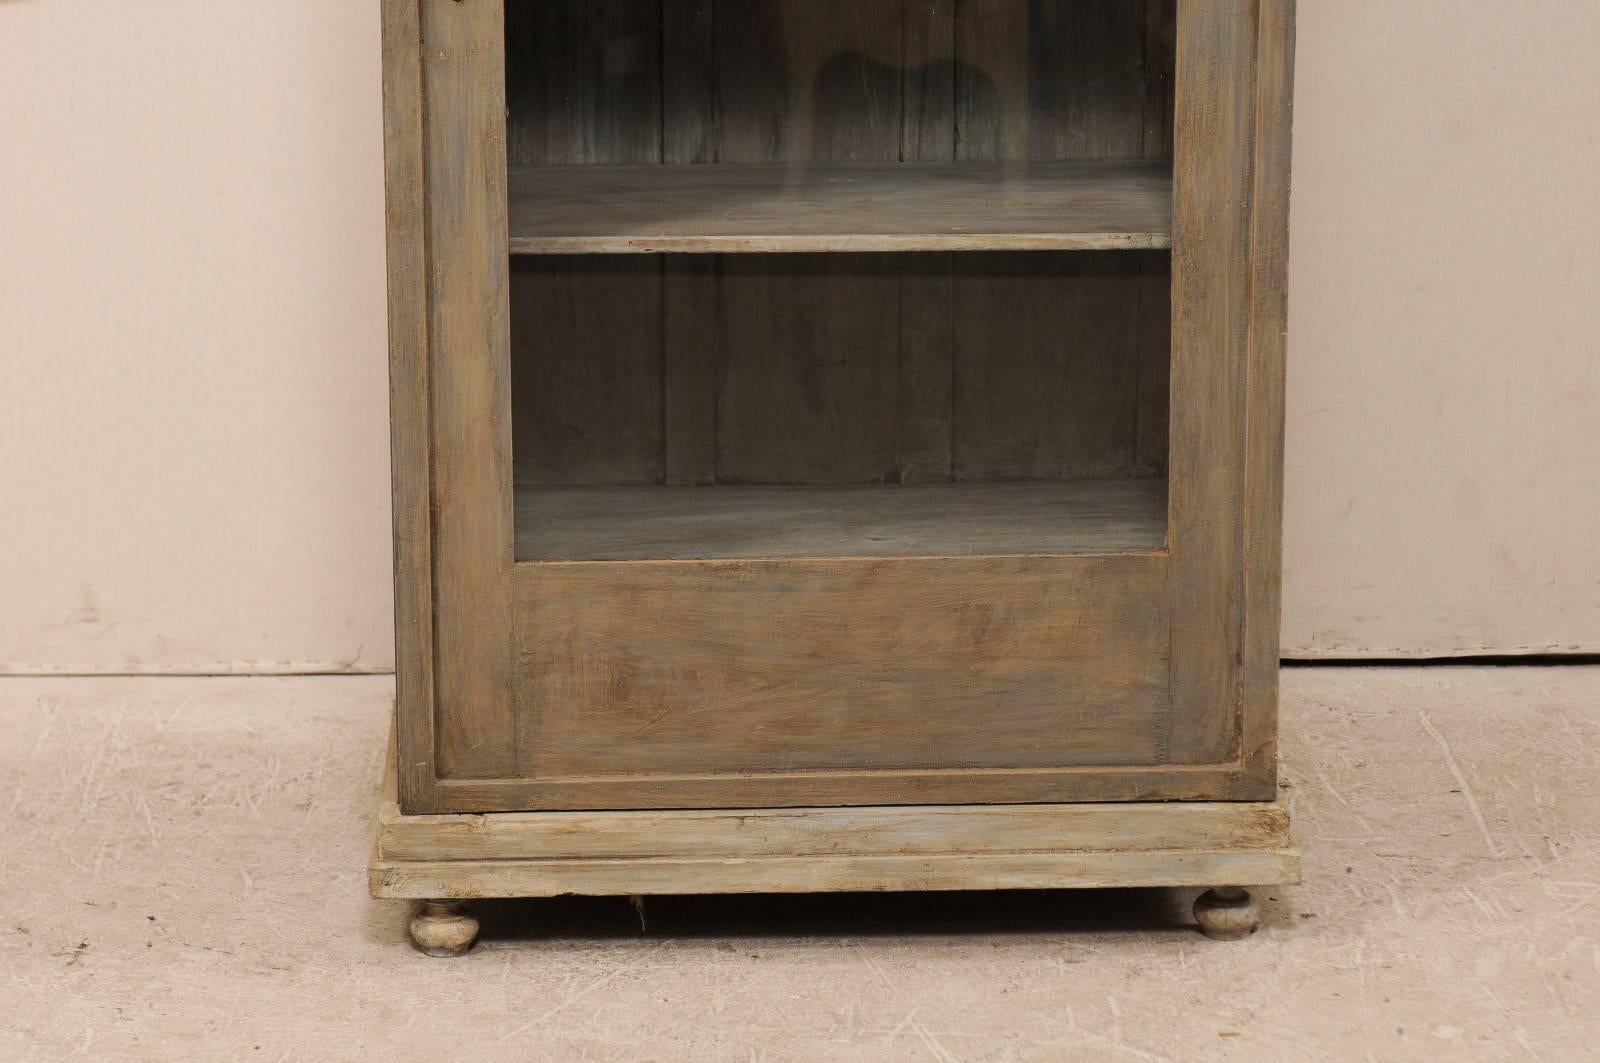 Carved European Painted Wood Vitrine or Cabinet with Glass Front and Adjustable Shelves